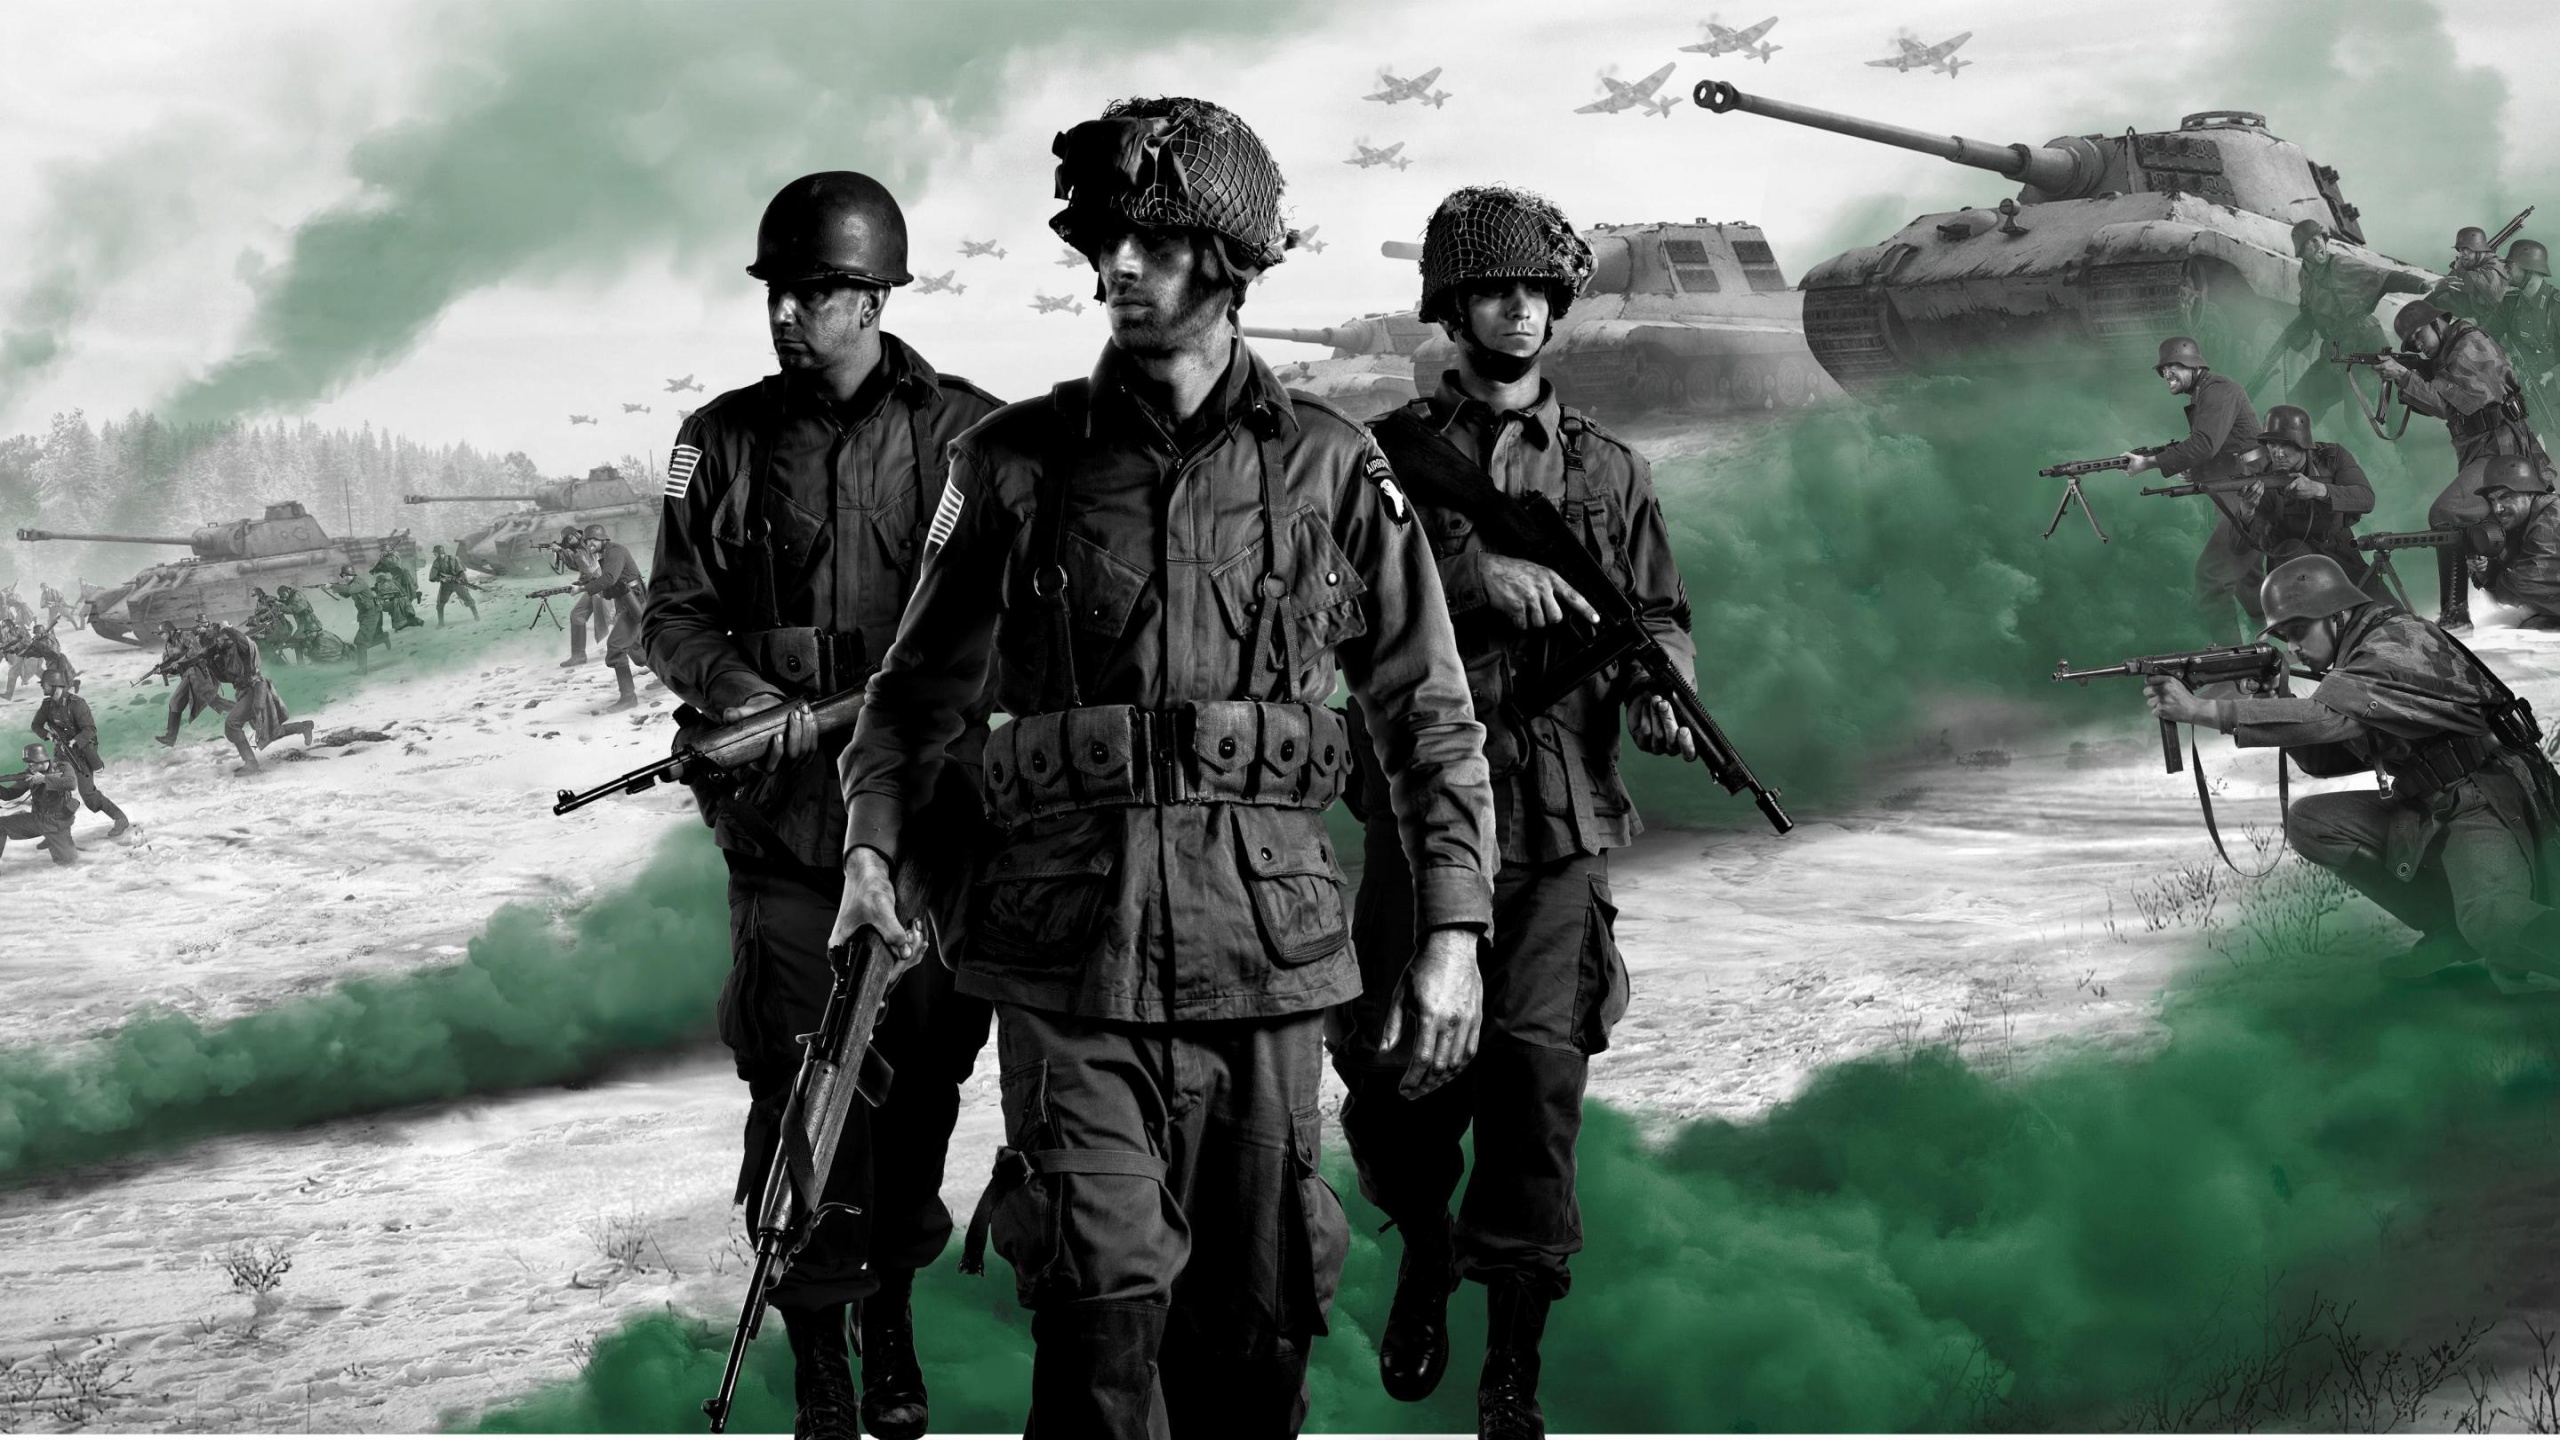 Ardennes Assault promo art, no caption. American soldiers standing in front of green clouds with guns drawn and airplanes overhead. In the midground a variety of tanks and troup formations are placed to depict a war scene.